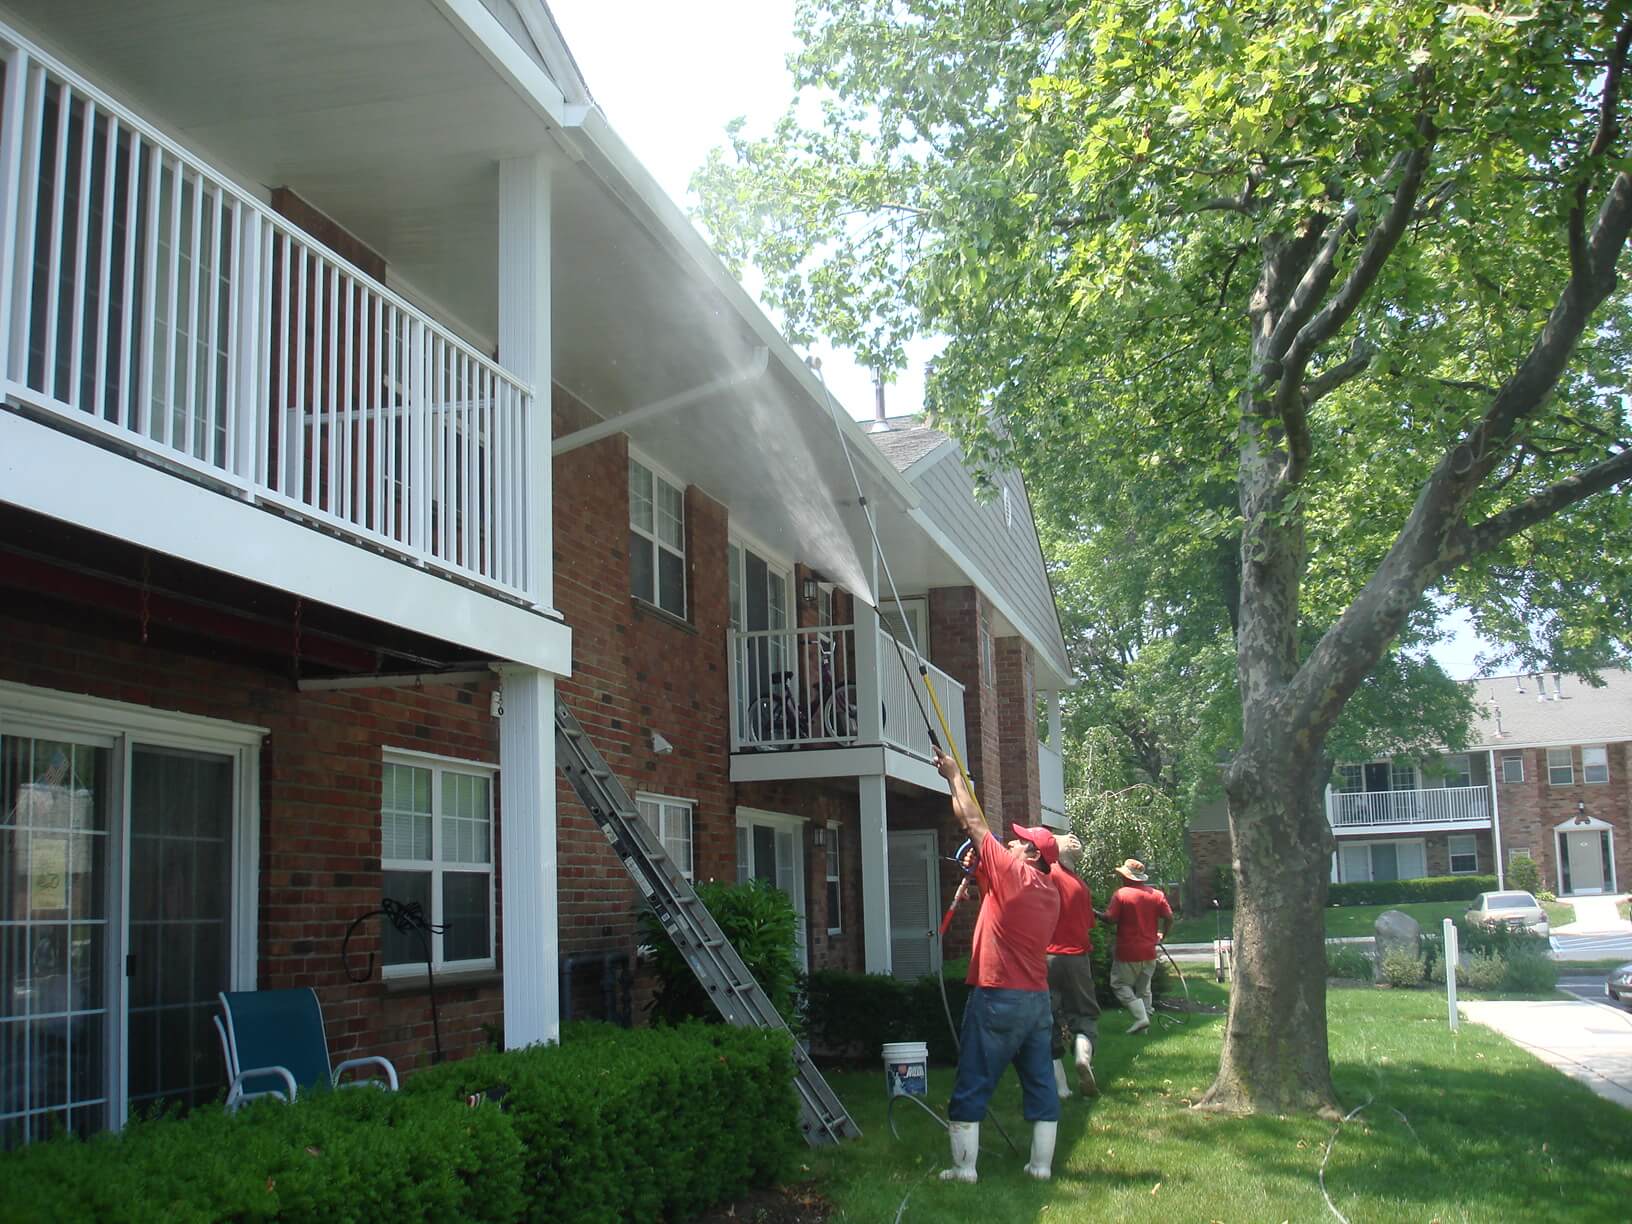 Your property deserves an exterior cleaning ally - and we’re here to fill those shoes! Clean County proudly serves HOAs, condos, and multi-unit properties in the area with comprehensive exterior cleaning solutions.